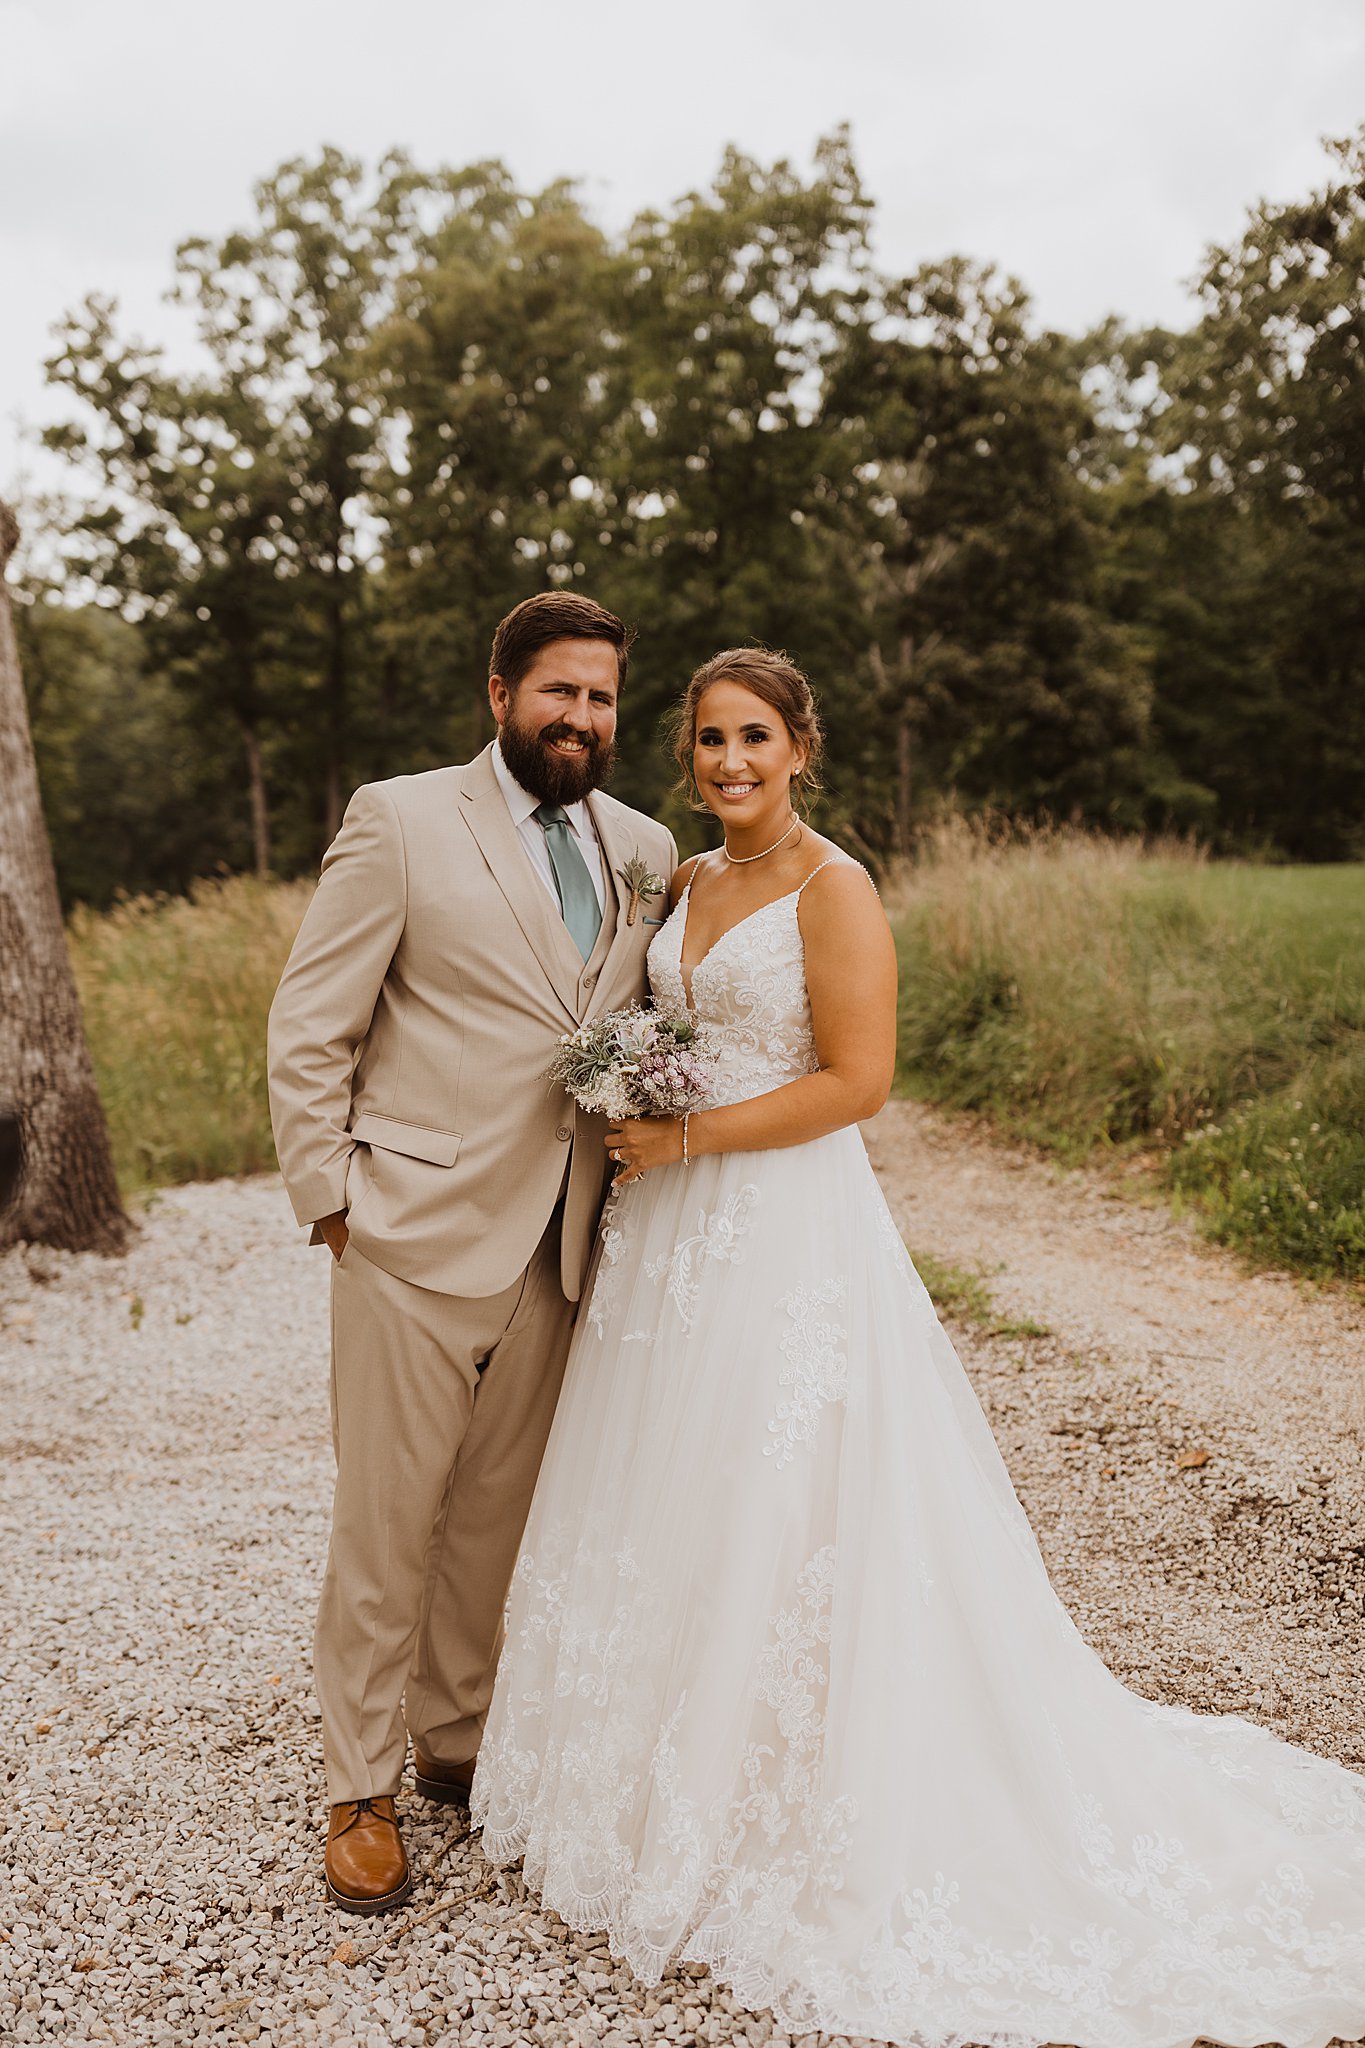 Bride and Groom First Look | St. Louis Wedding Photos